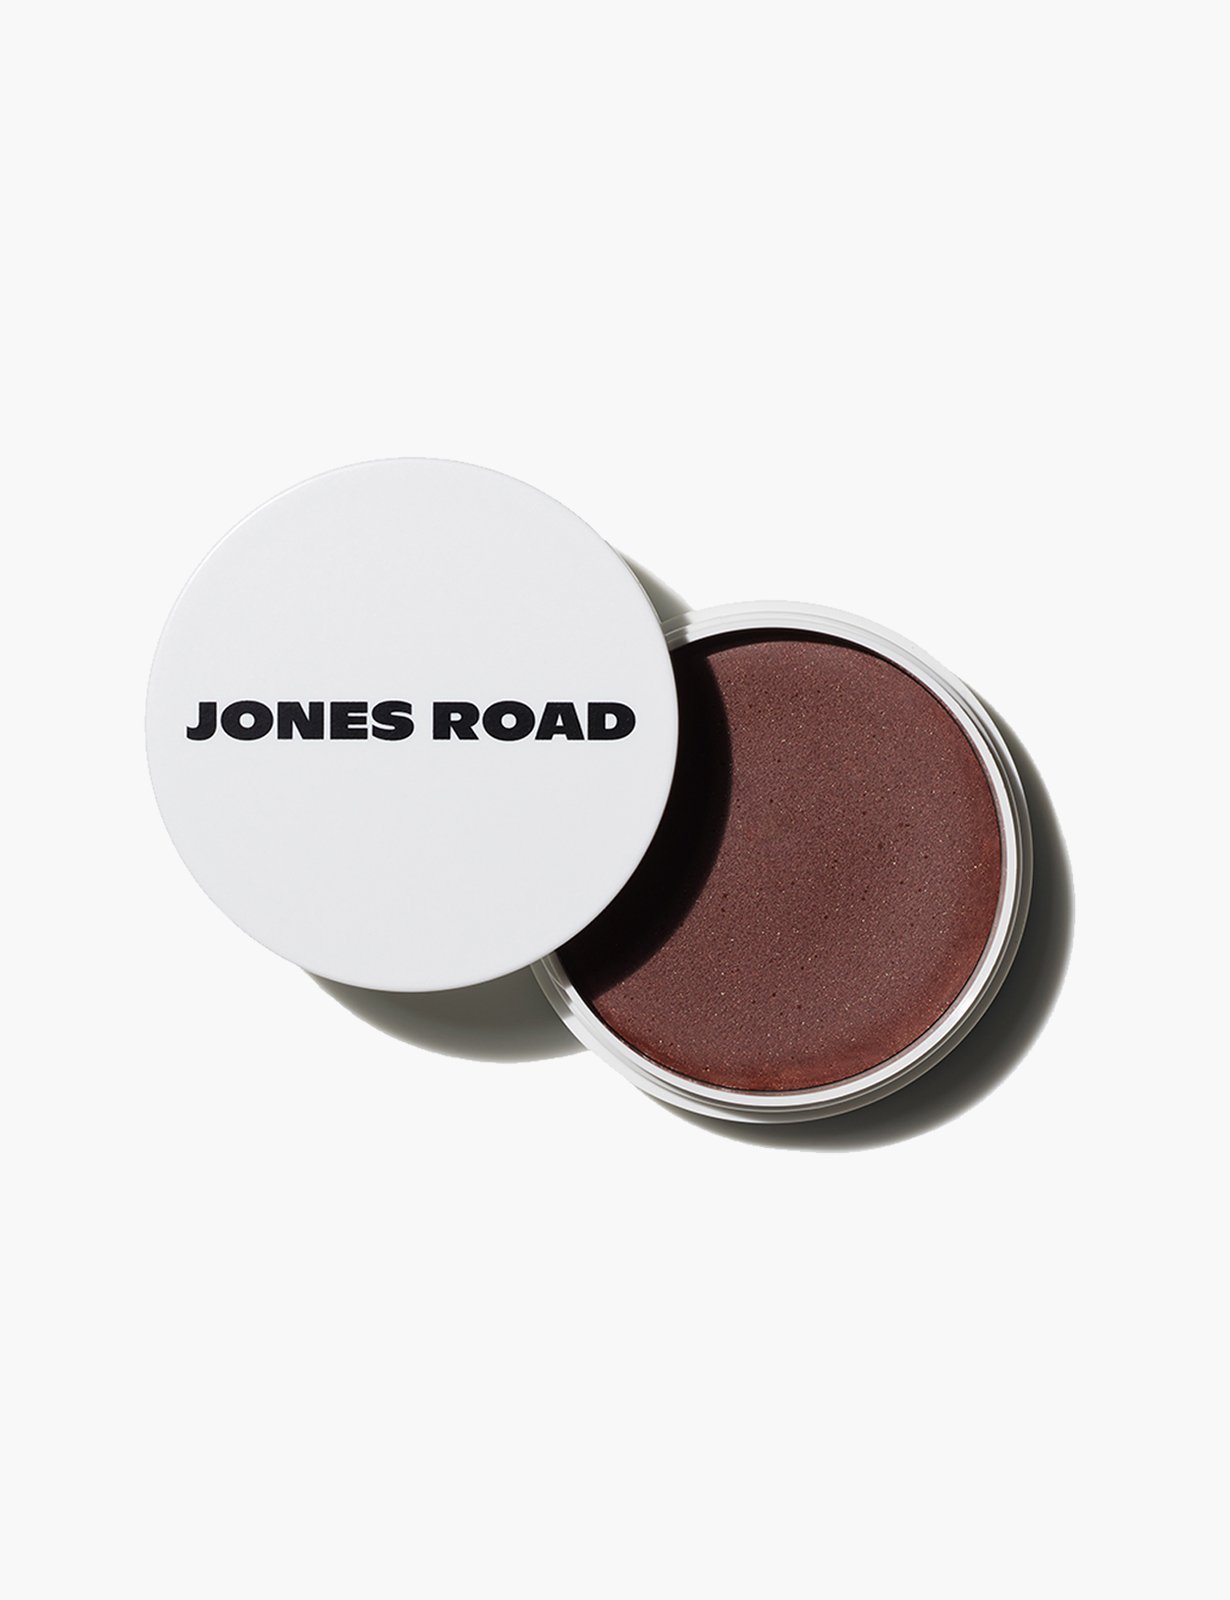 Jones Road Miracle Balm in Sunkissed